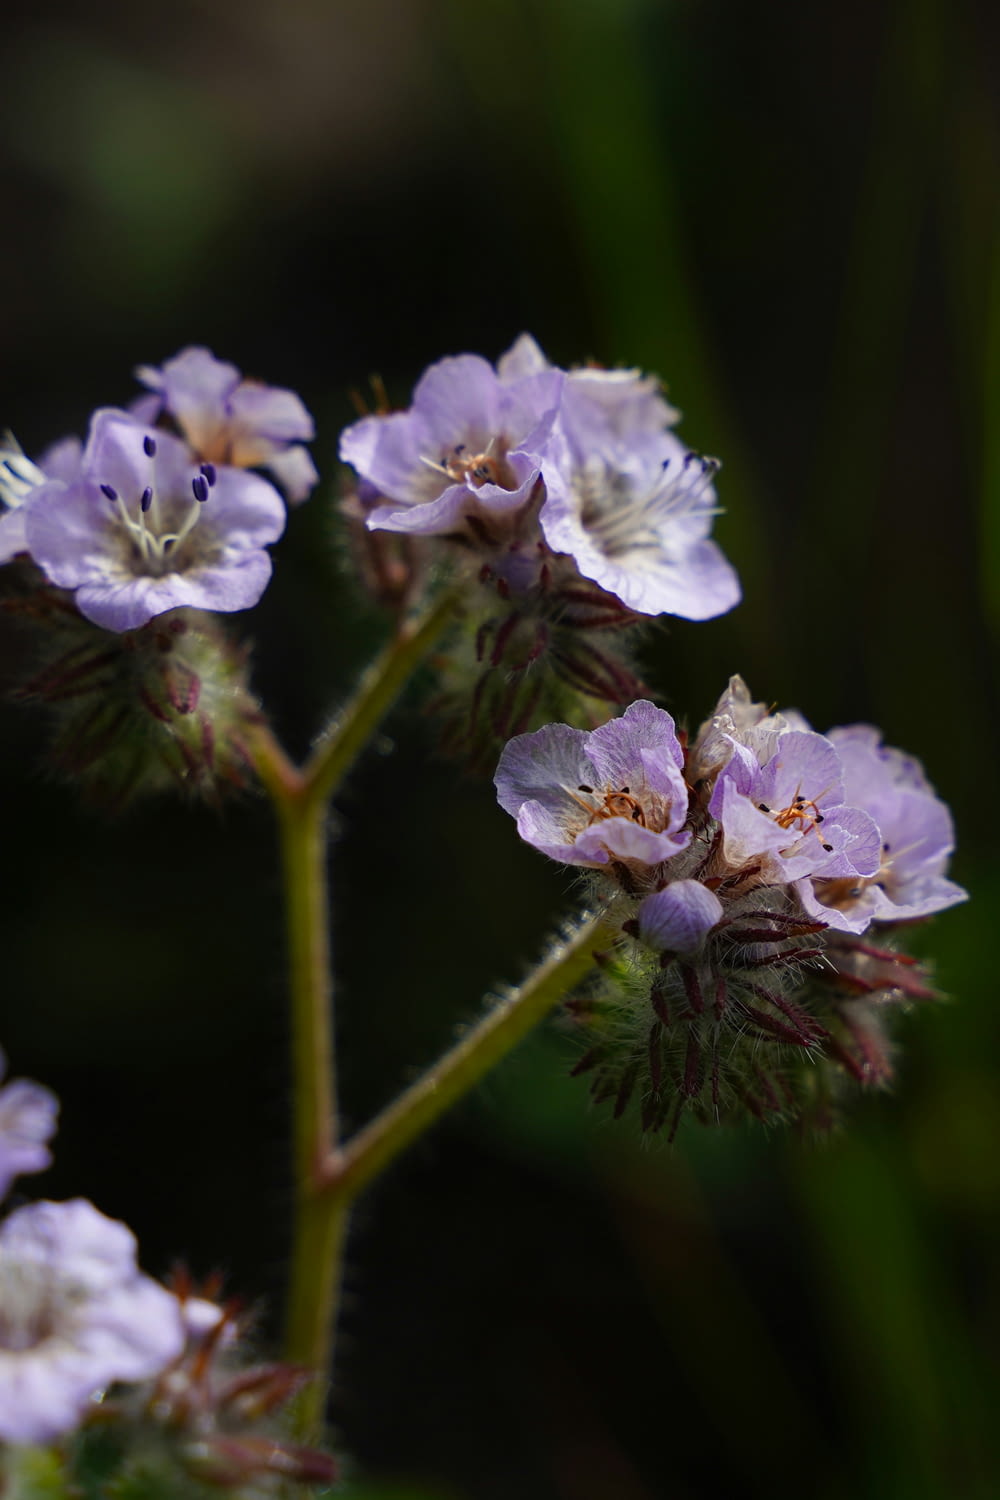 a close up of a small purple flower